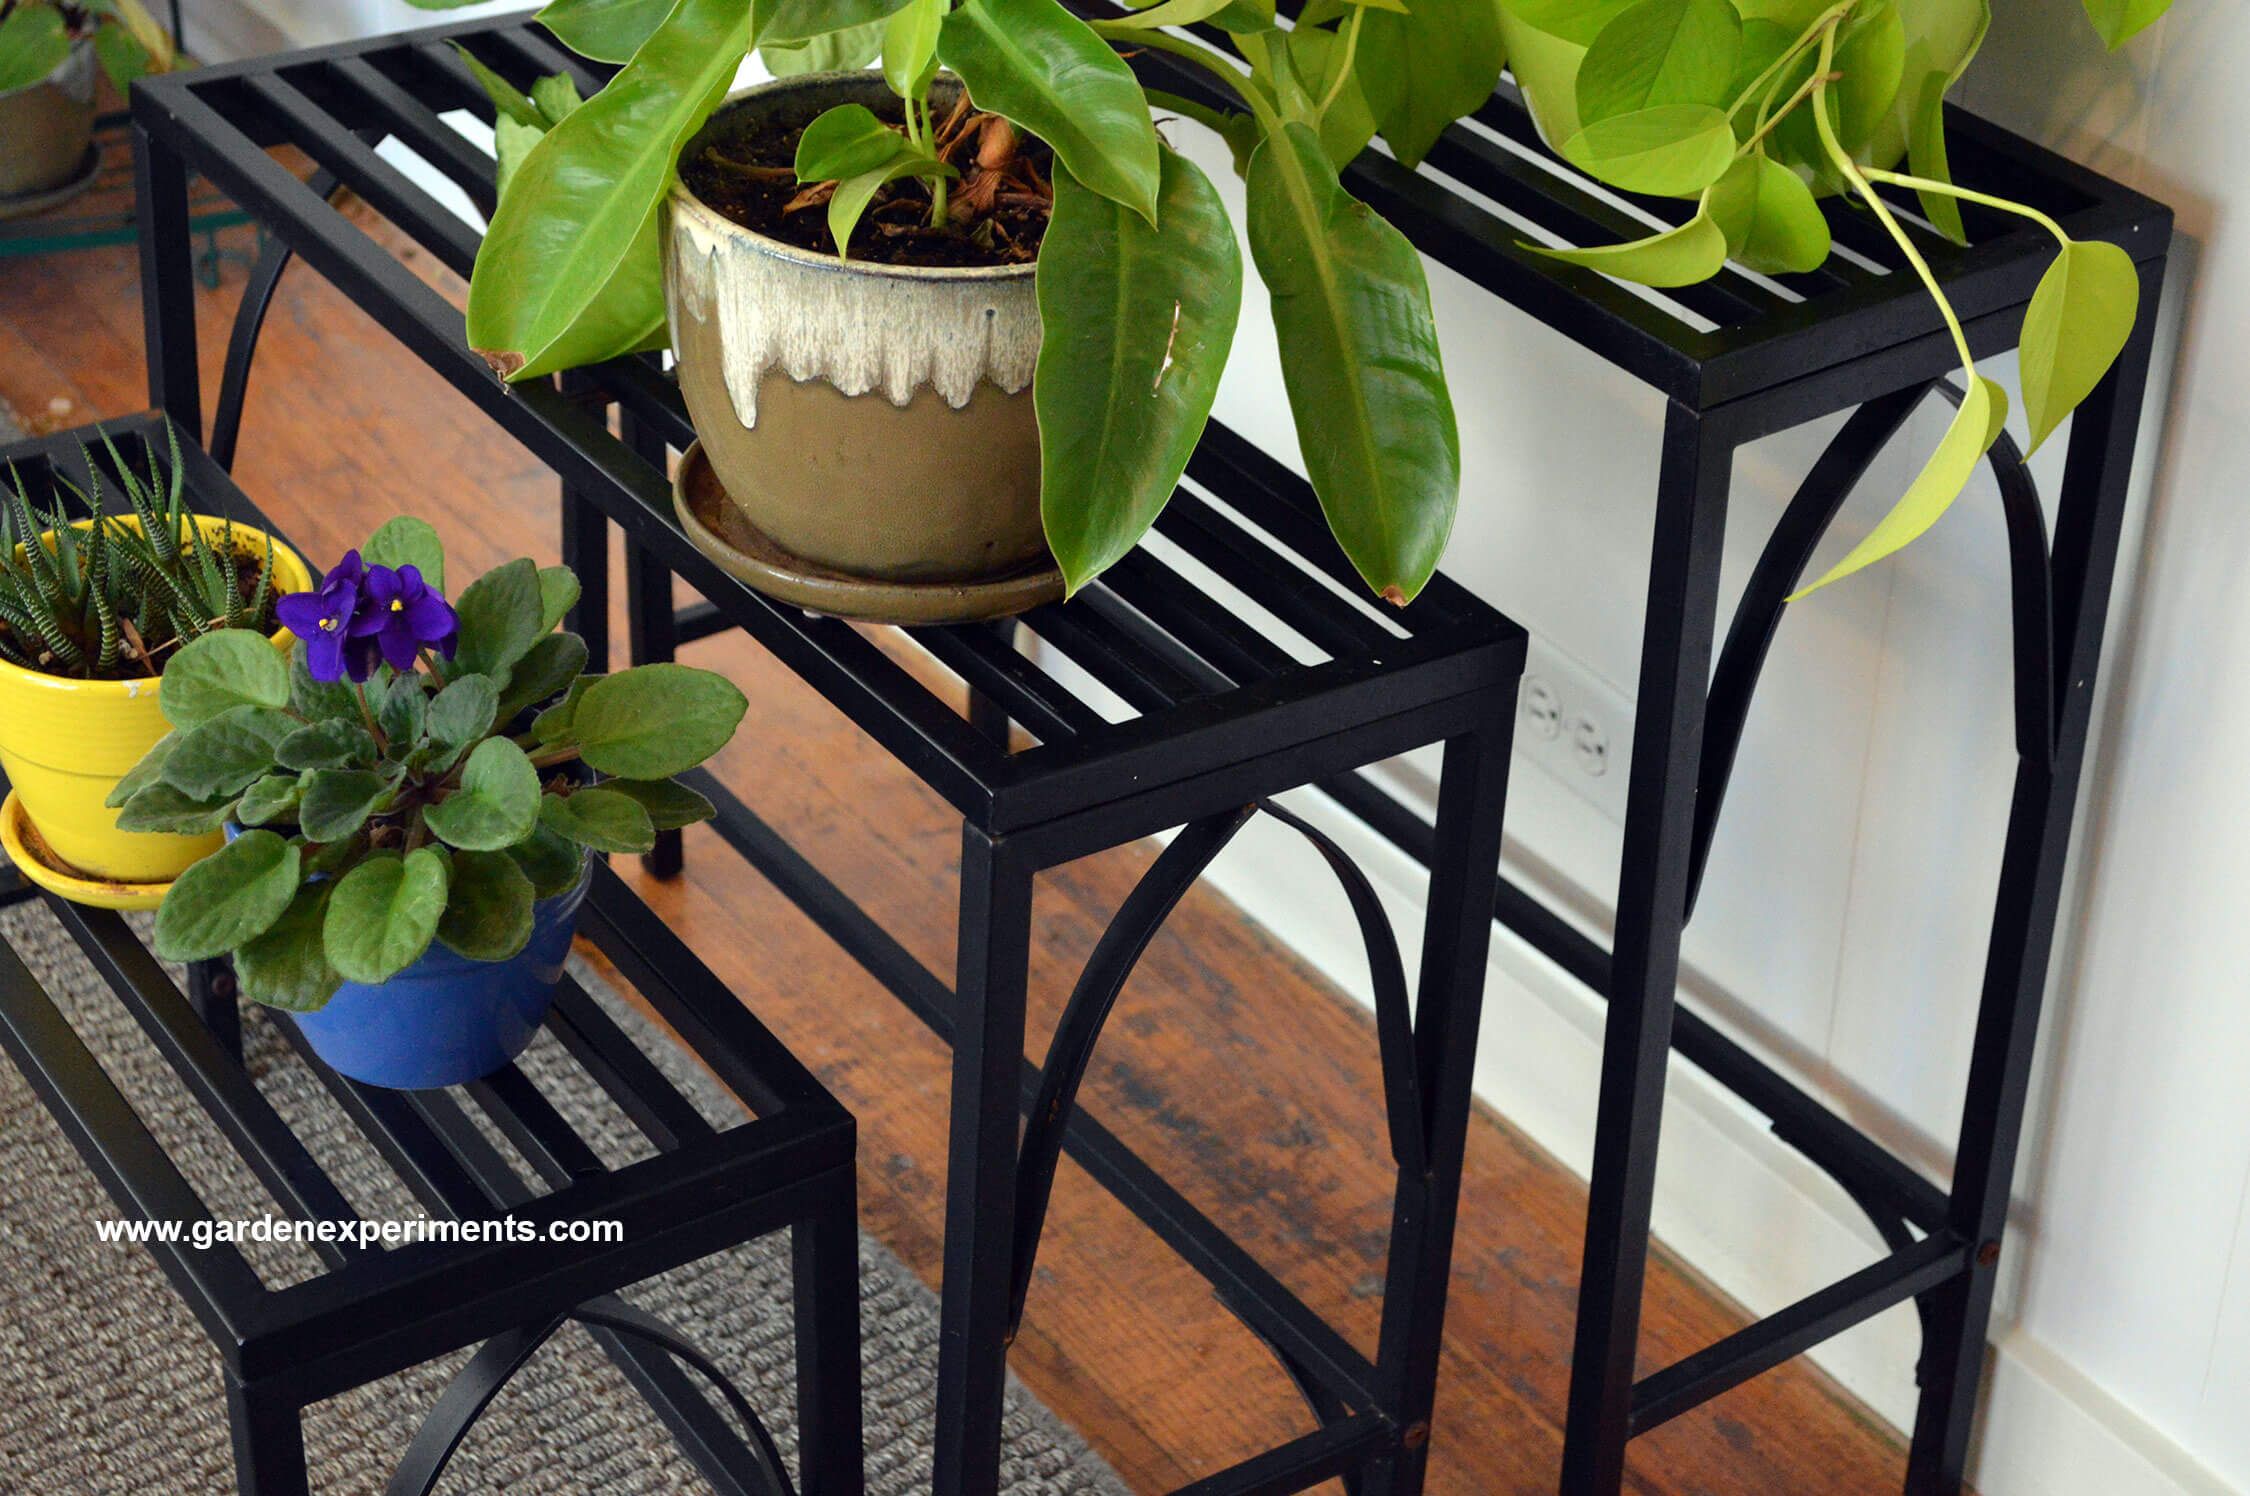 Sturdy Metal Plant Stand Holds 12 Plants With Regard To Outdoor Plant Stands (View 15 of 15)